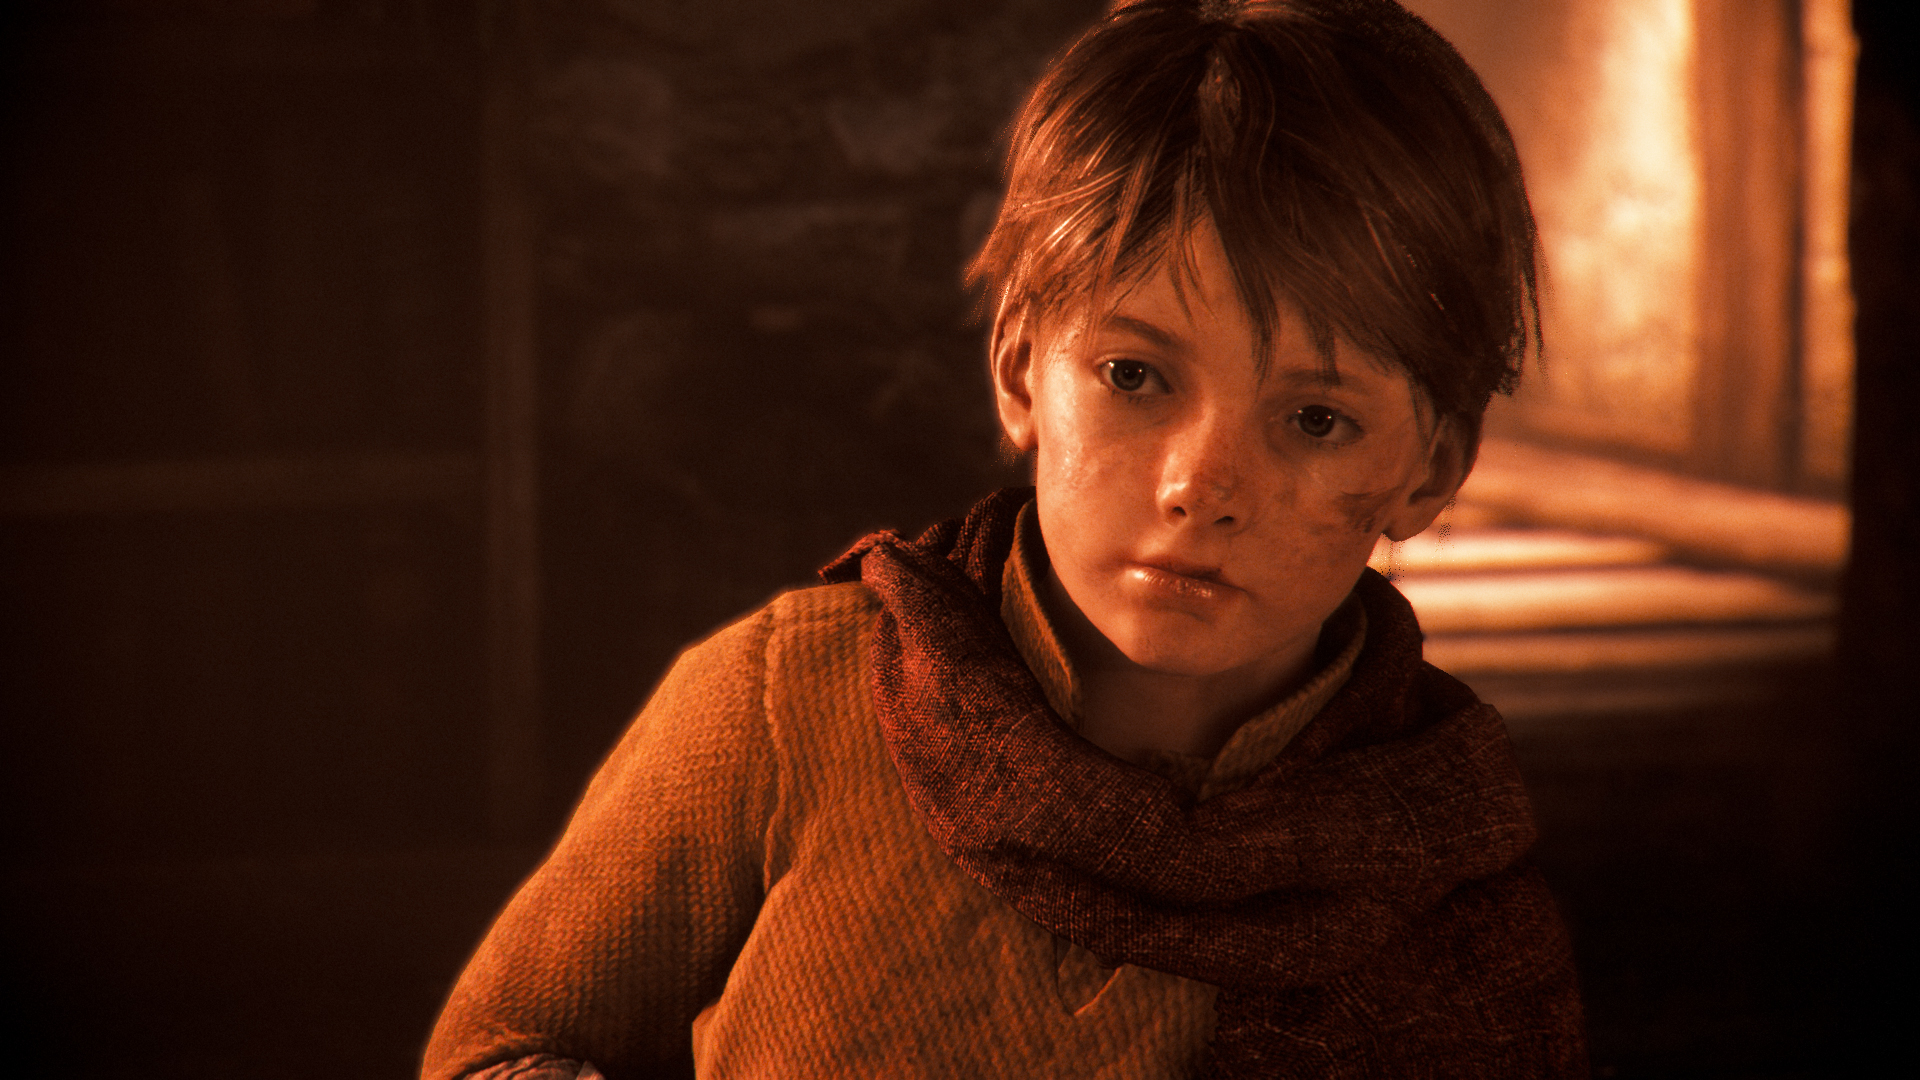 A Plague Tale: Innocence supports 4K resolution on PS4 Pro and